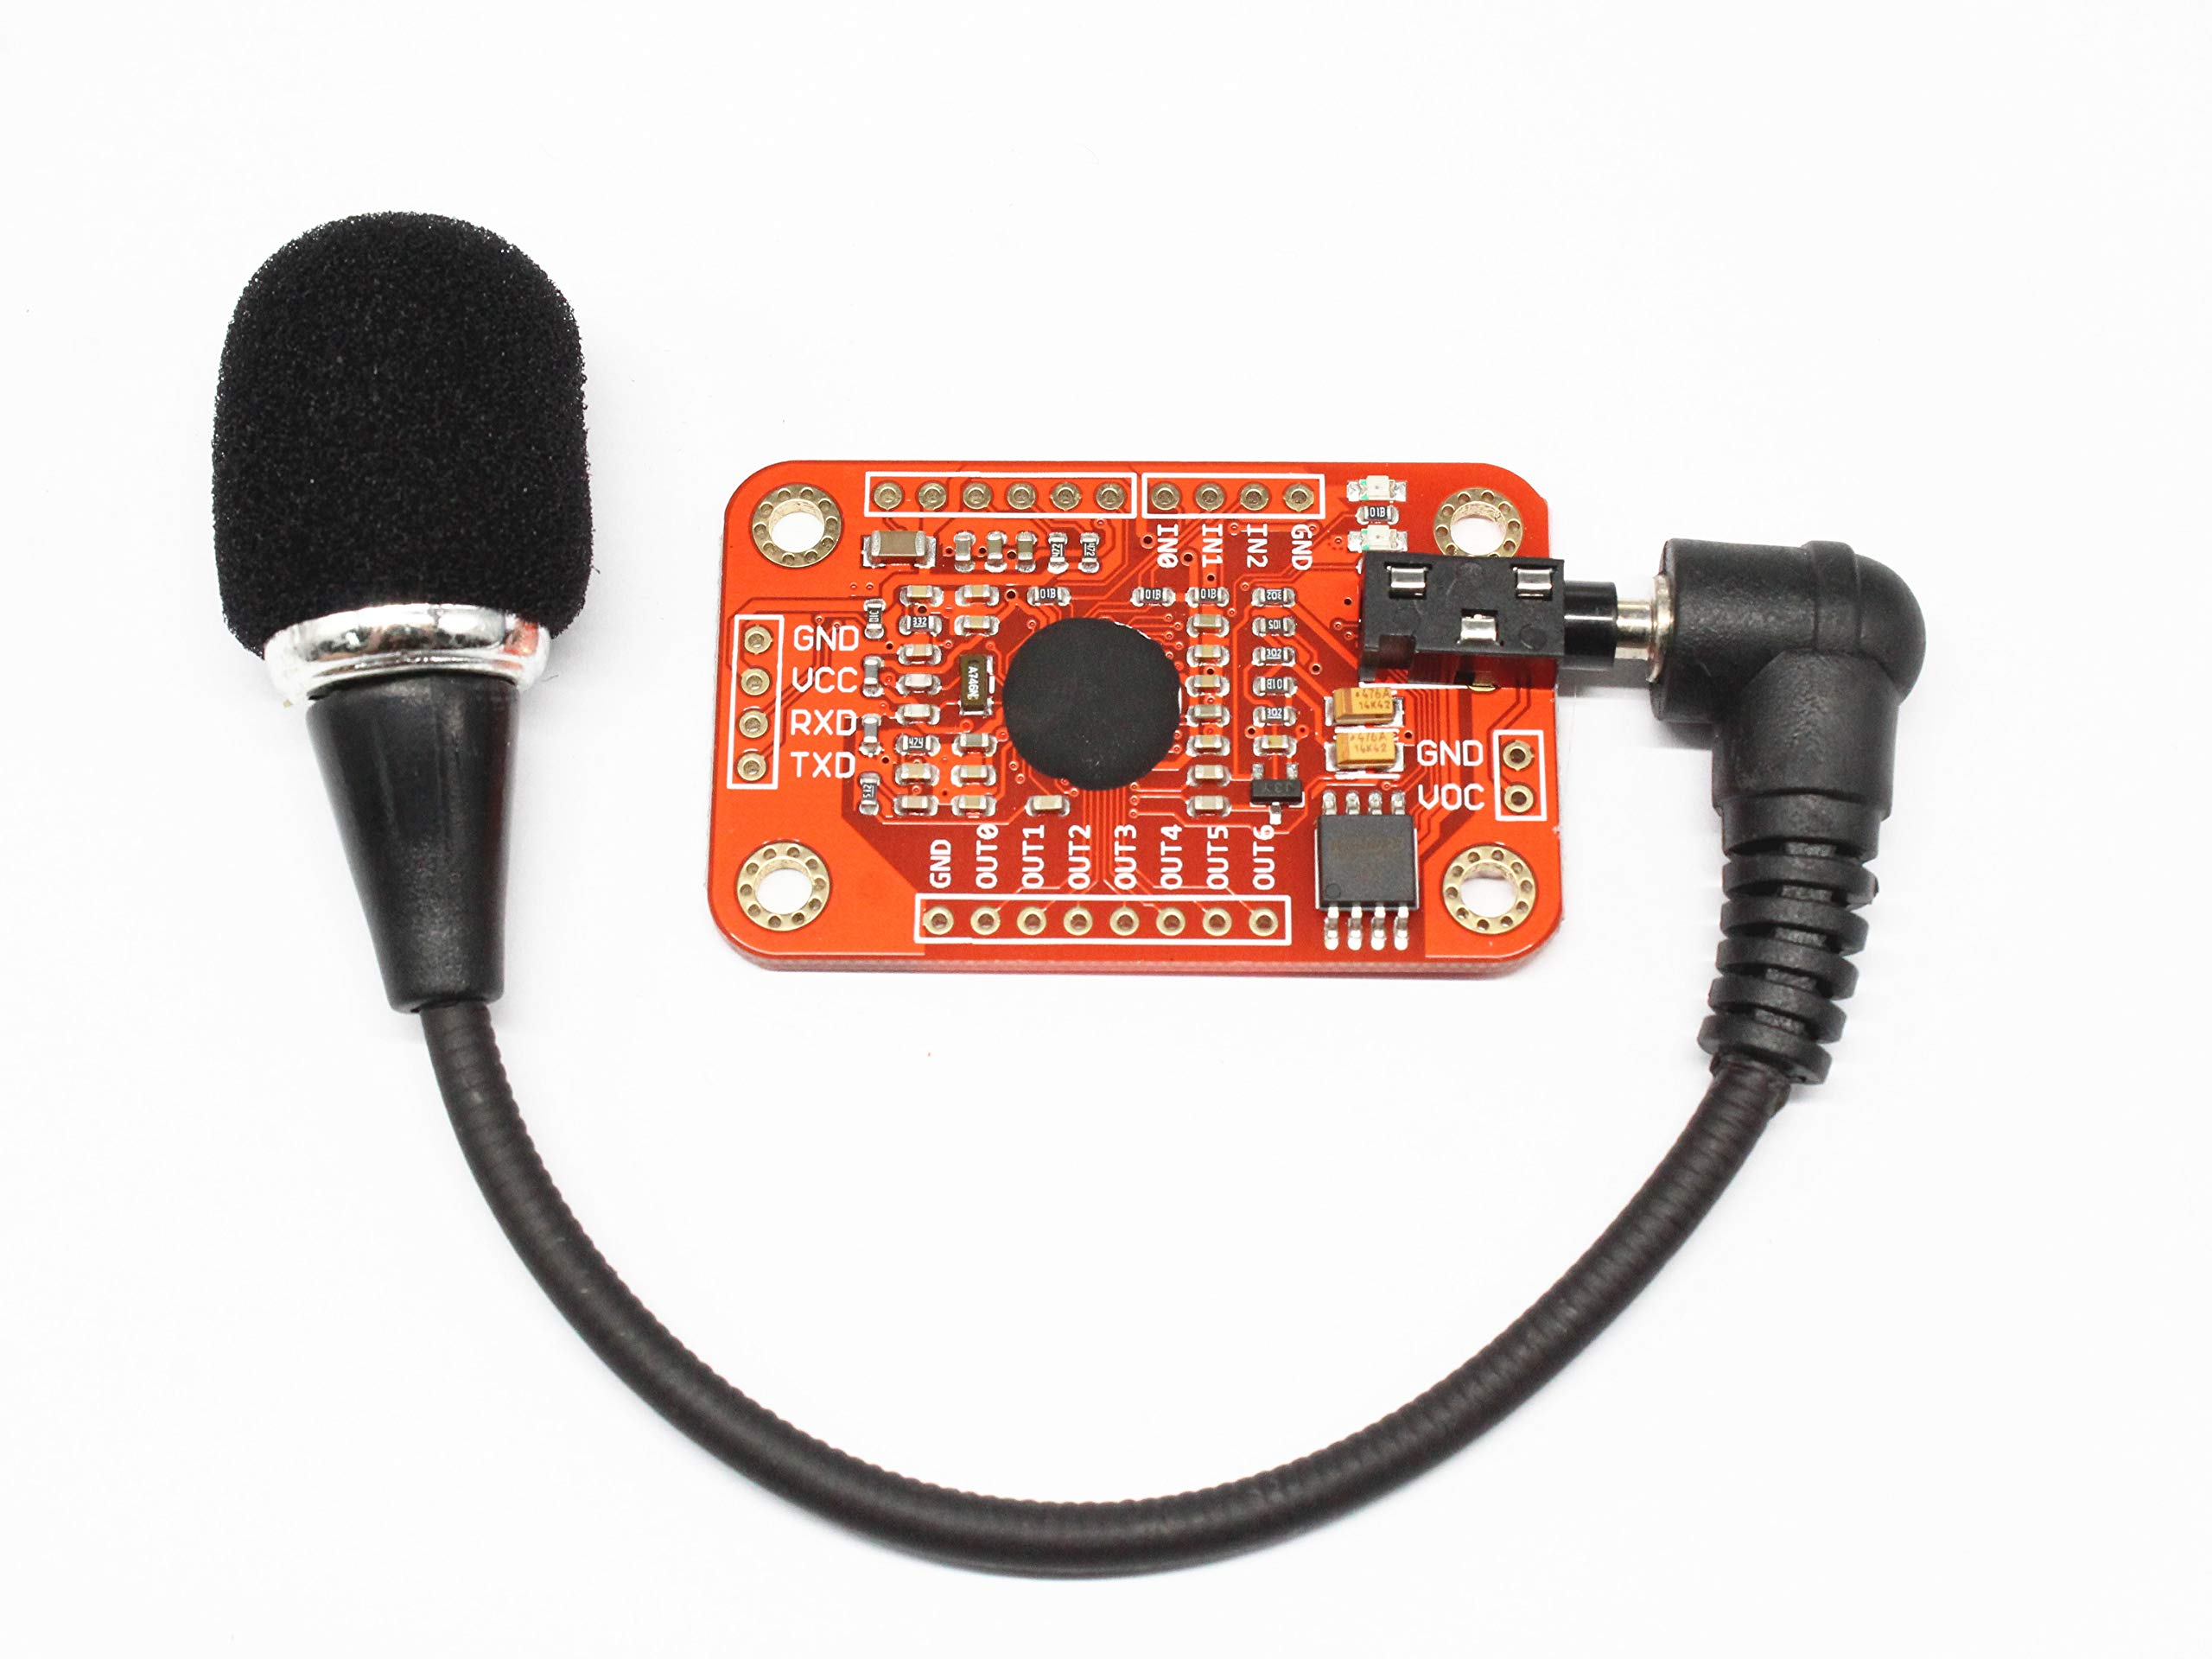 How To Make A Voice Recognition Module